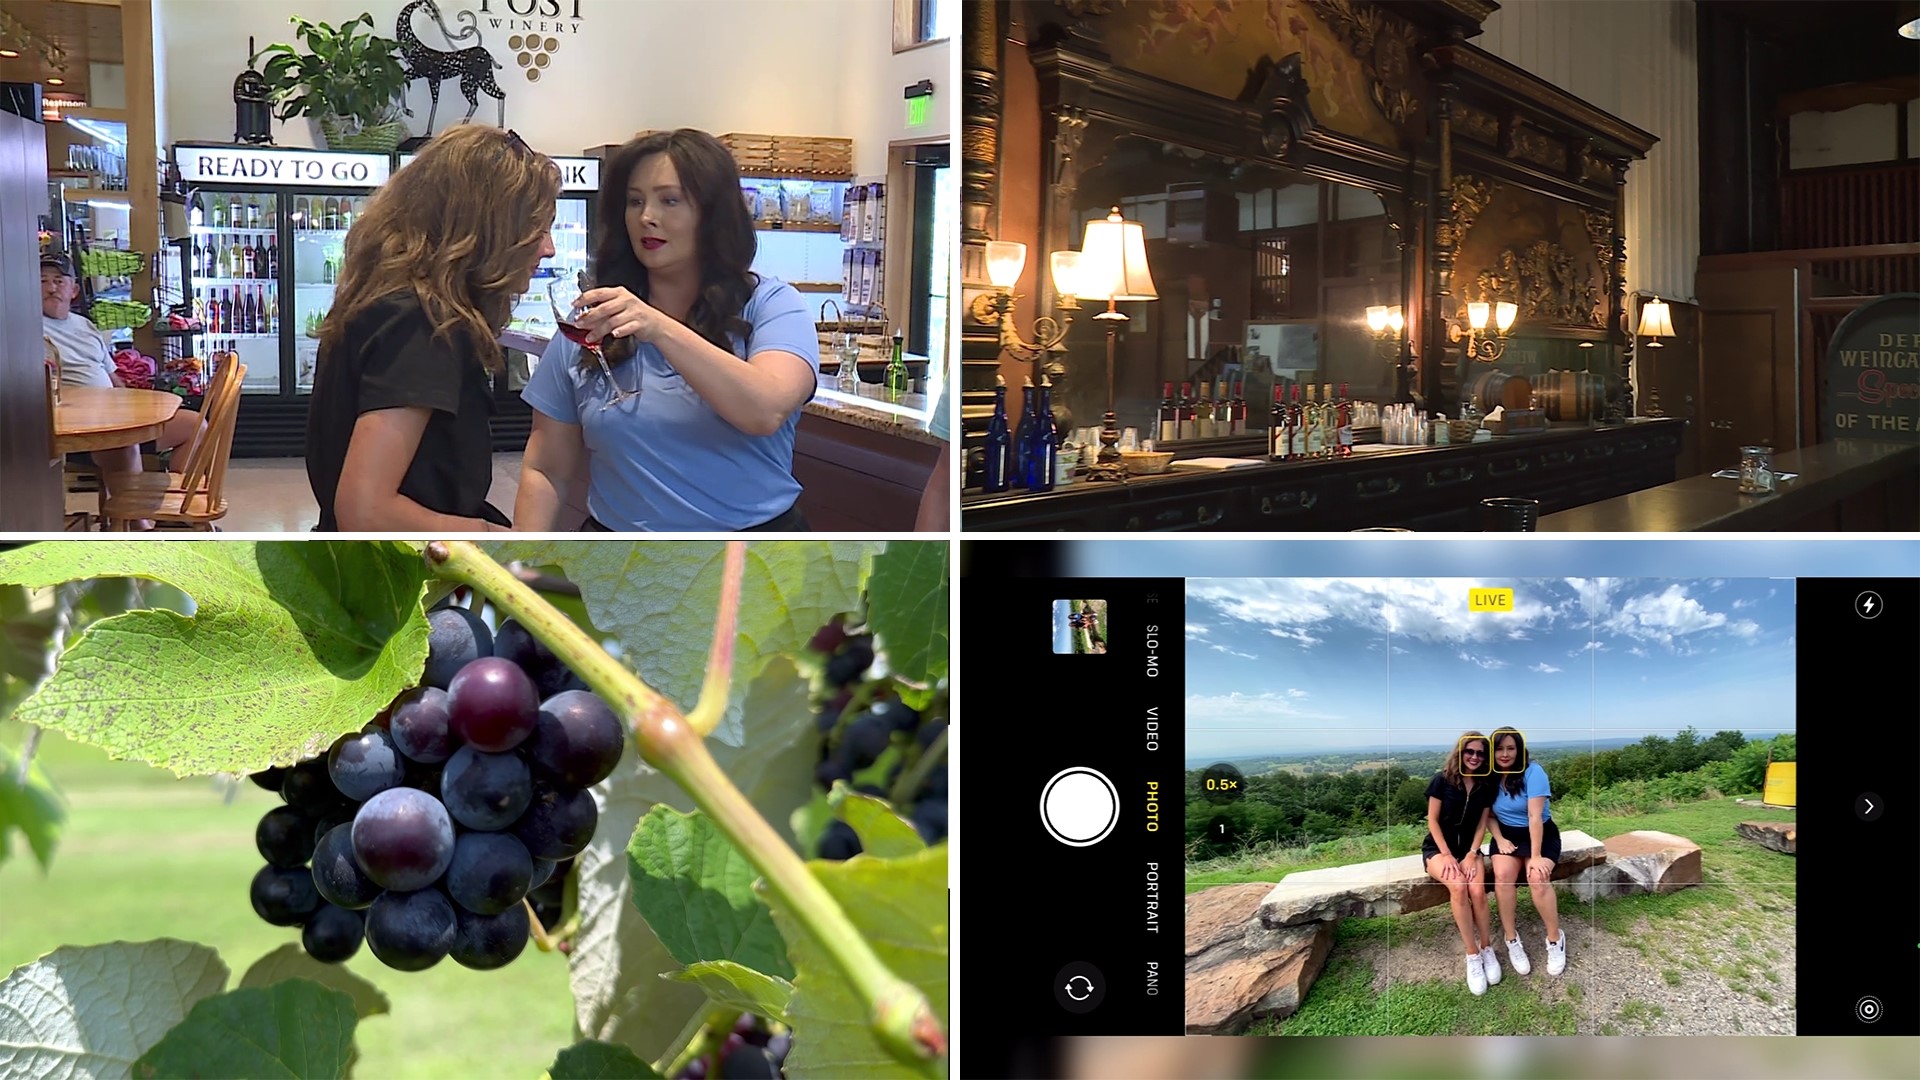 Morning anchors Tiffany Lee and Jo Ellison stopped by a couple of vineyards in their trip to the Wine Capital of Arkansas: Altus.